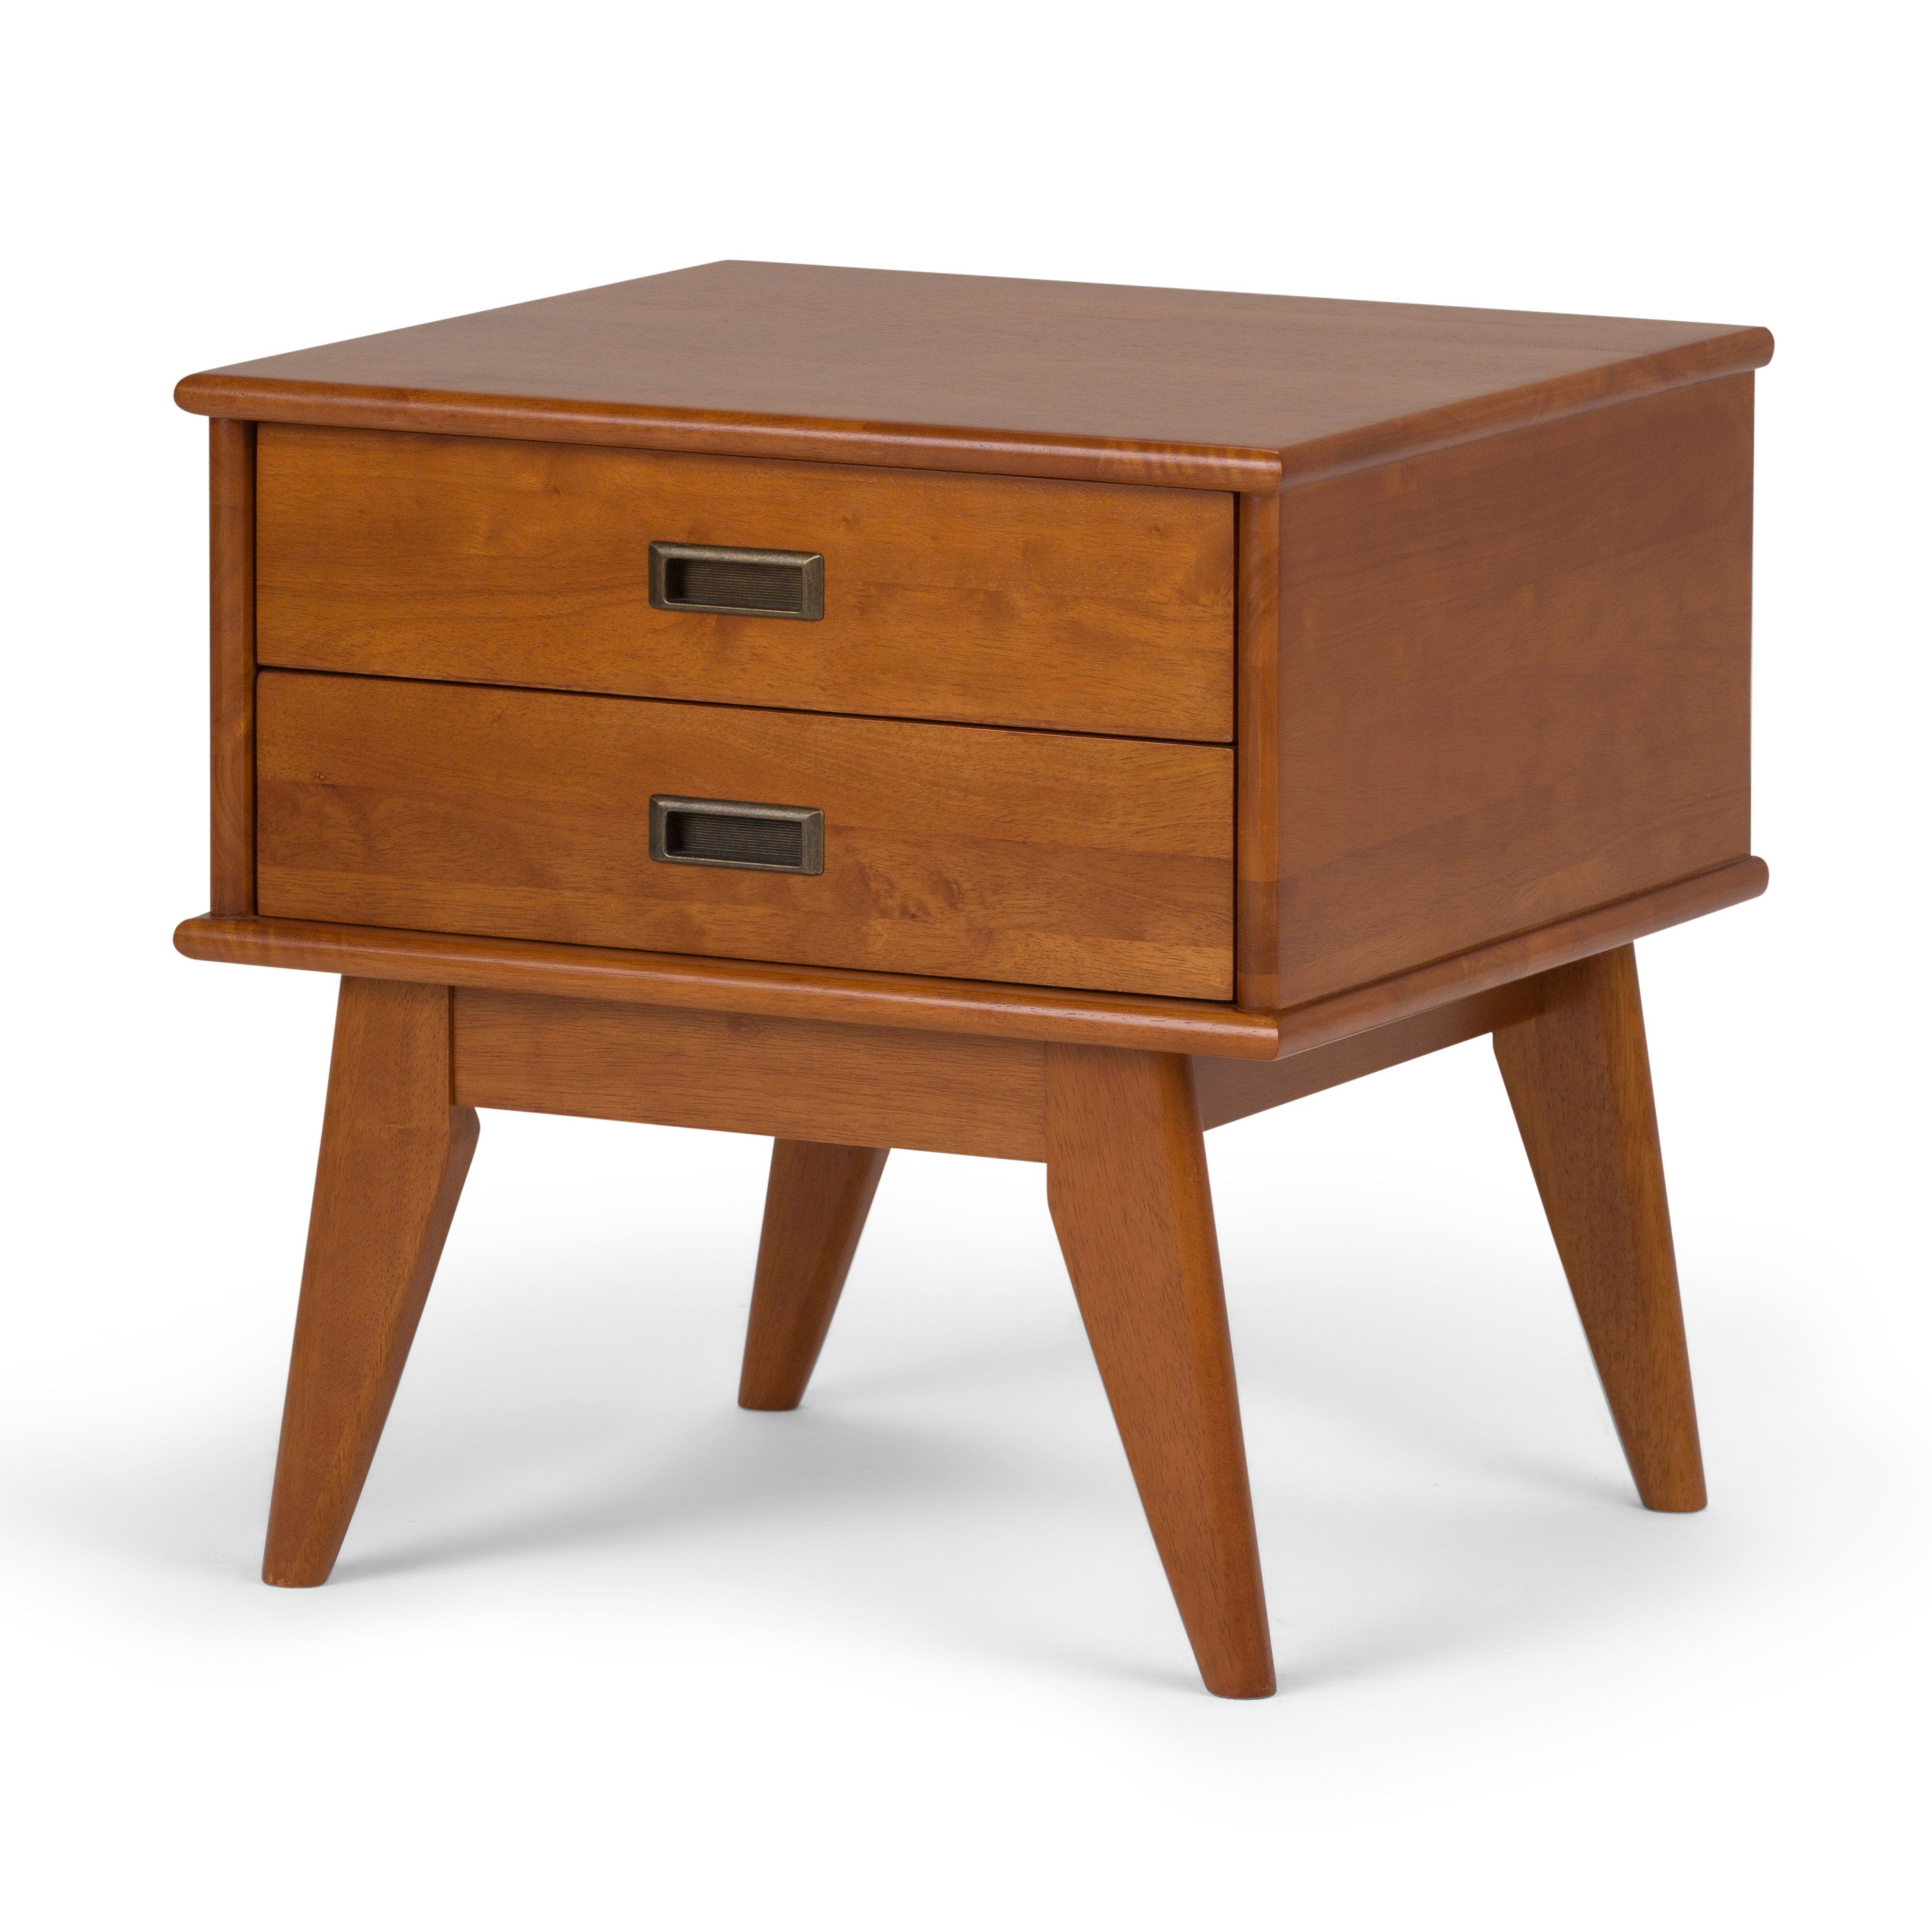 George Oliver Halvorson Buffet Table & Reviews | Wayfair With Regard To Solid Wood Contemporary Sideboards Buffets (View 17 of 20)